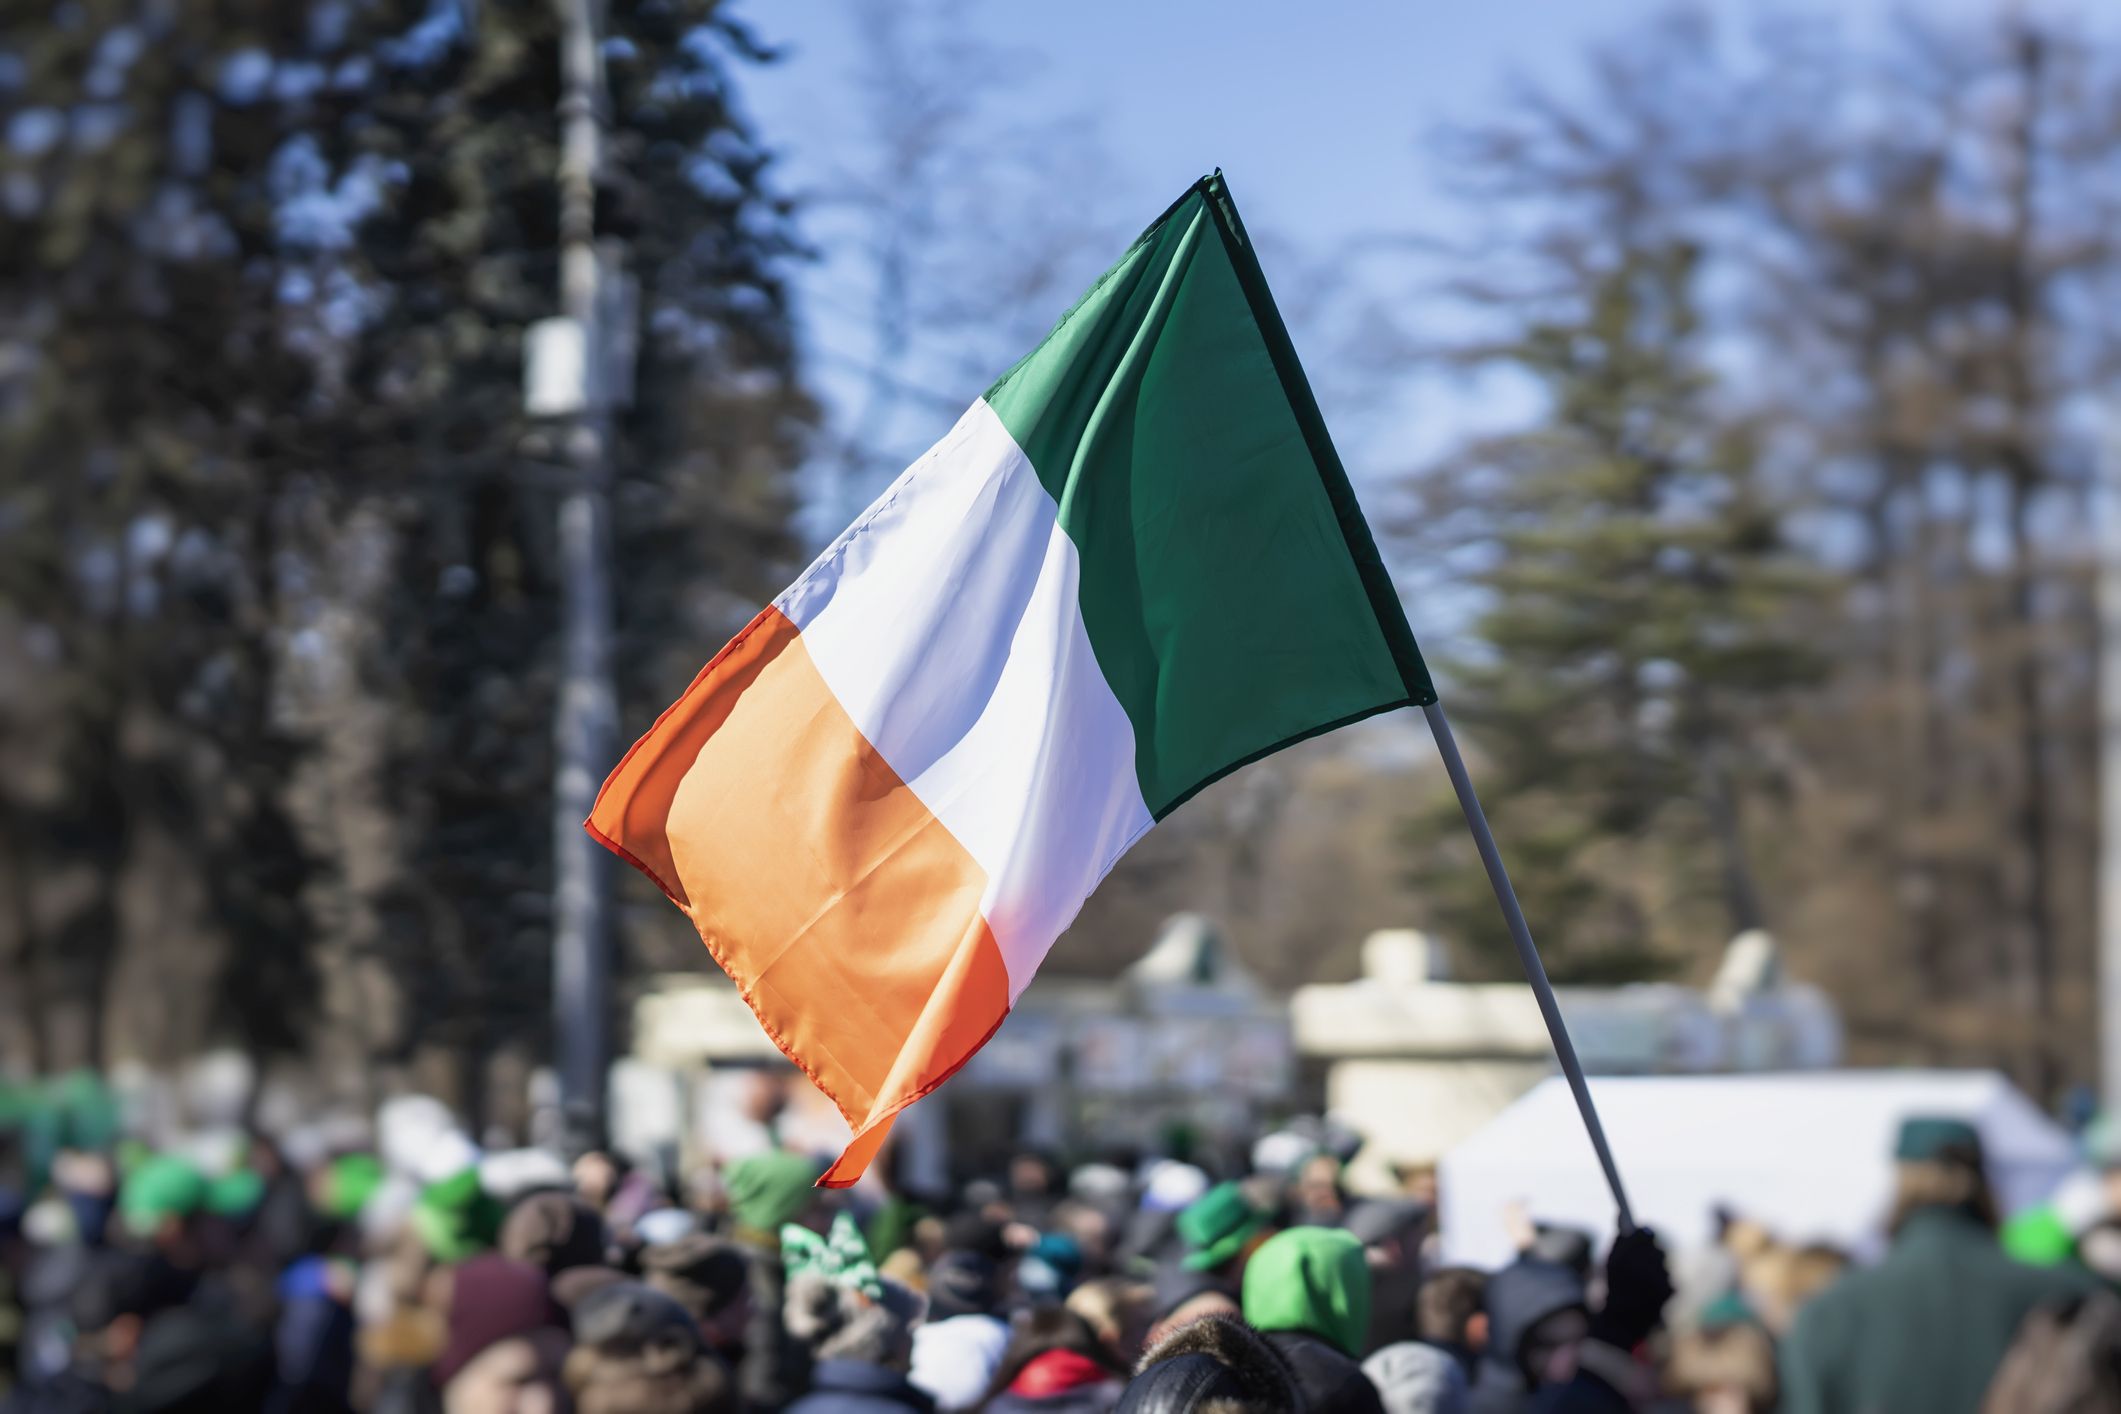 St. Patrick's Day History - True Facts About St. Patrick's Day